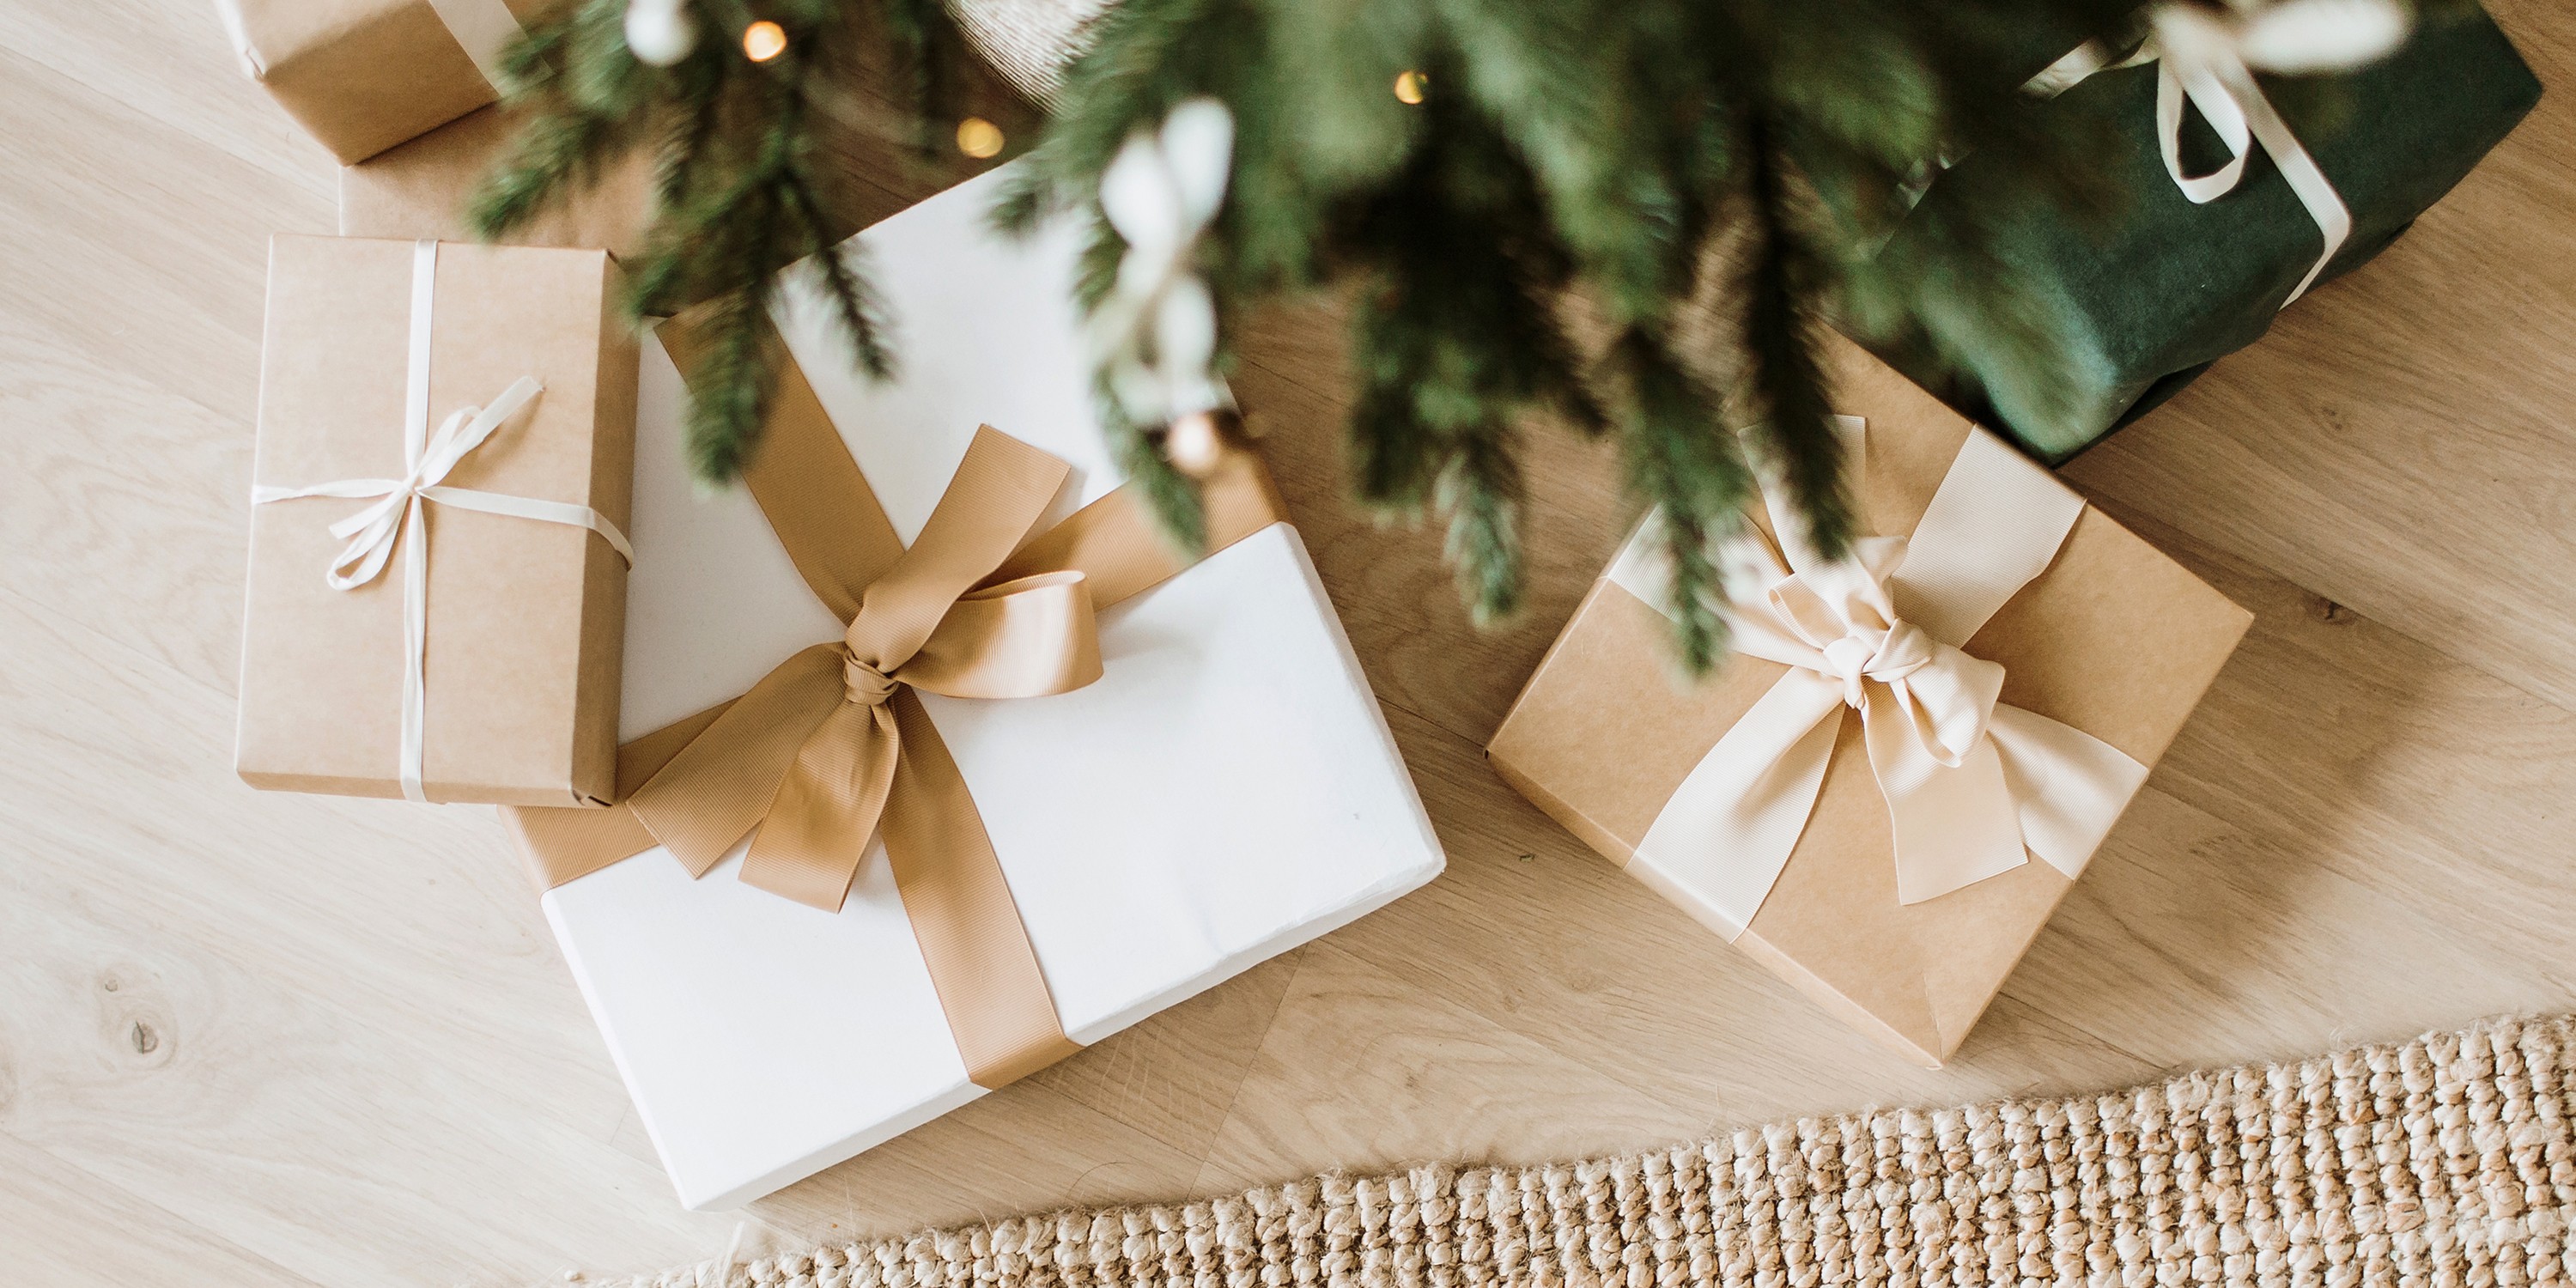 Recycling Christmas wrapping paper: Tips for your leftover holiday packaging